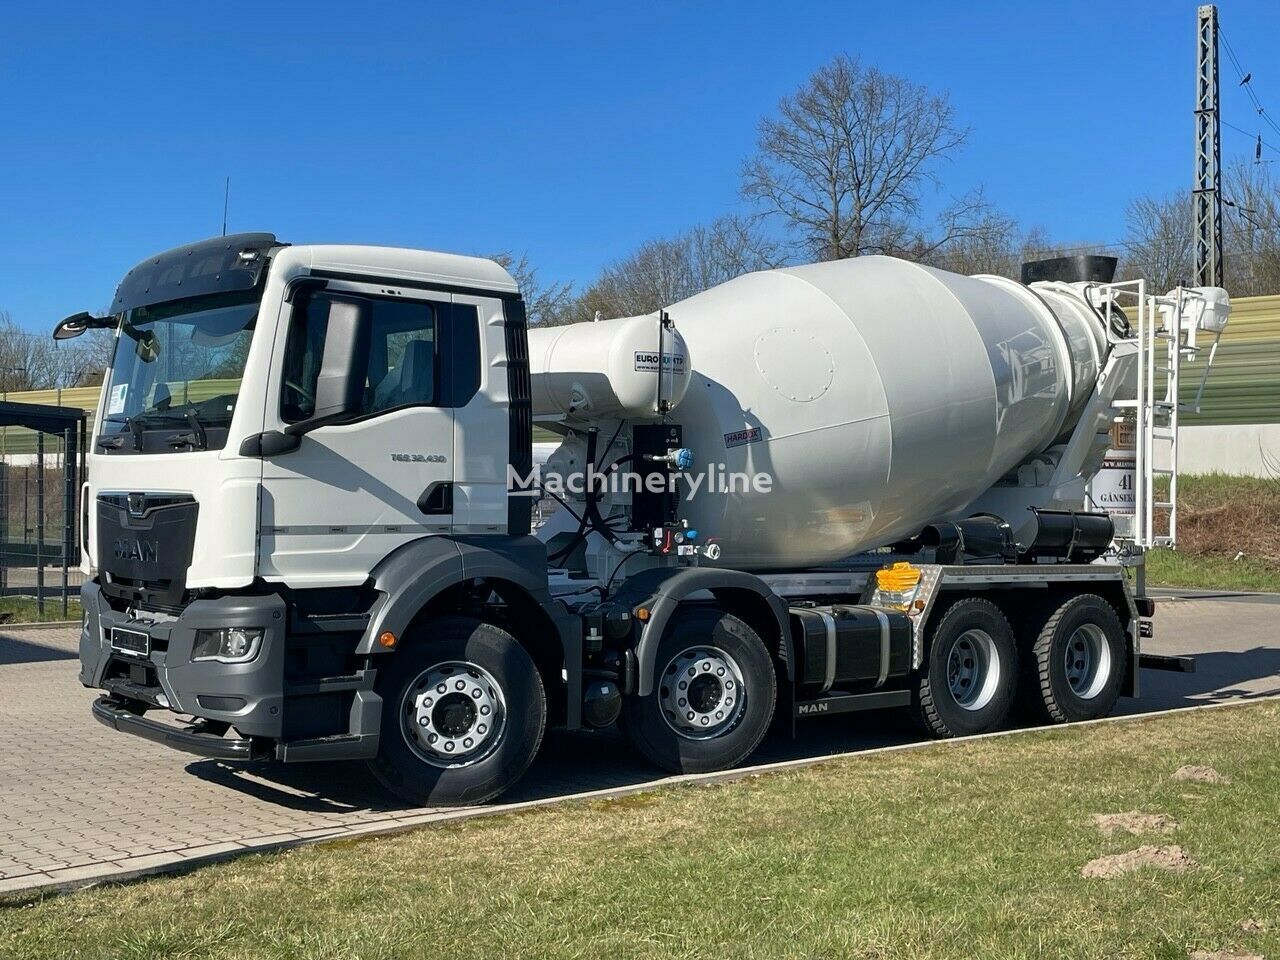 new Euromix MTP MTP EM 9 L TG 3  on chassis MAN TGS 32.430  concrete mixer truck